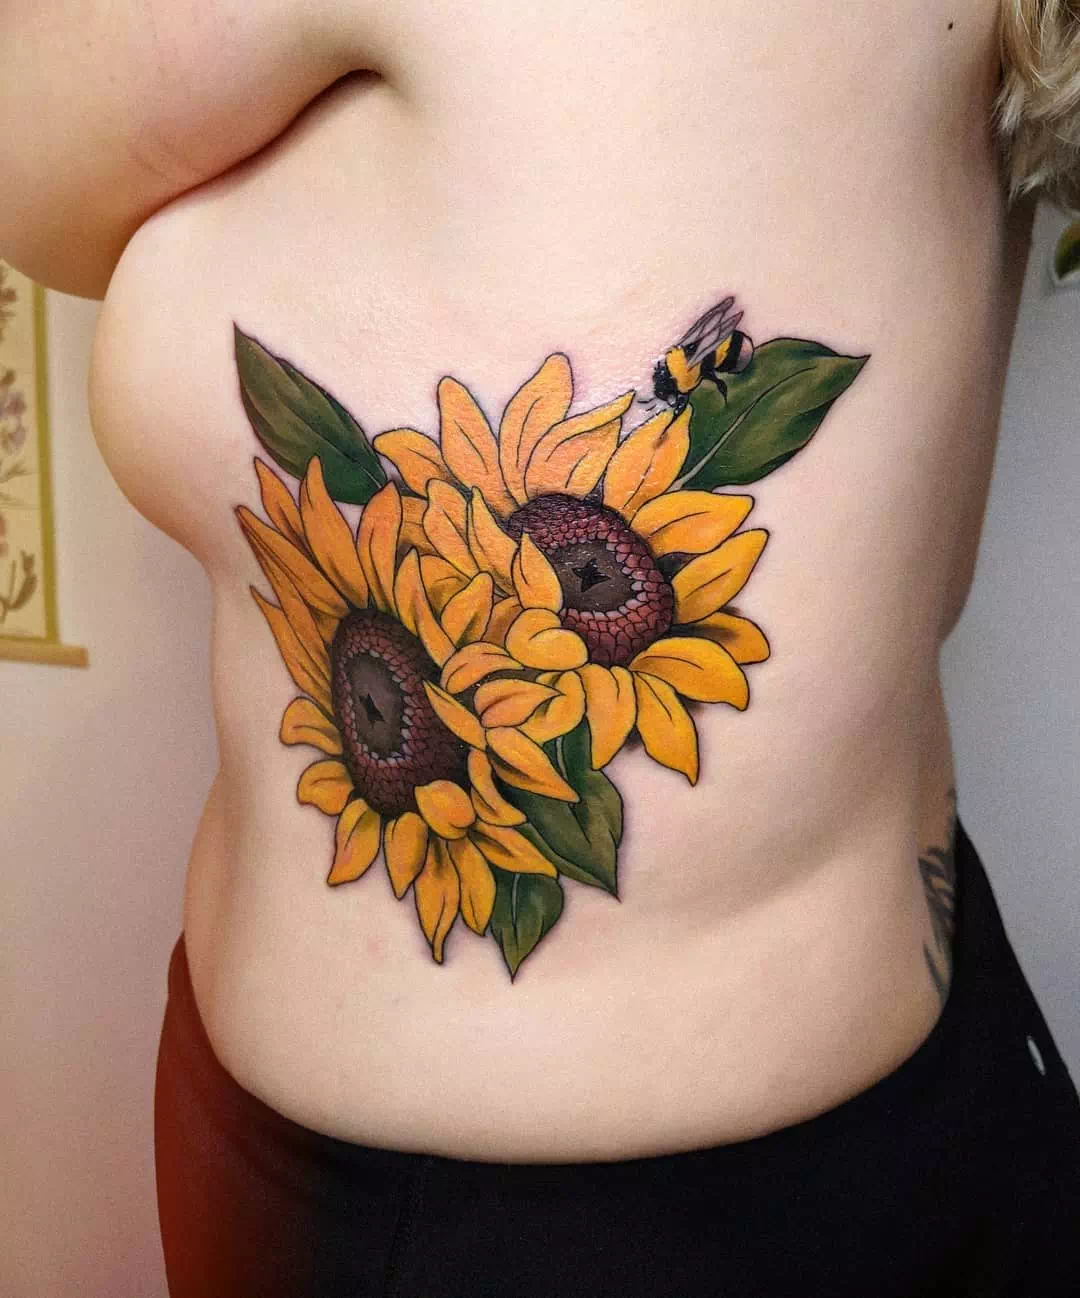 Large and Bright Sunflower Tattoo